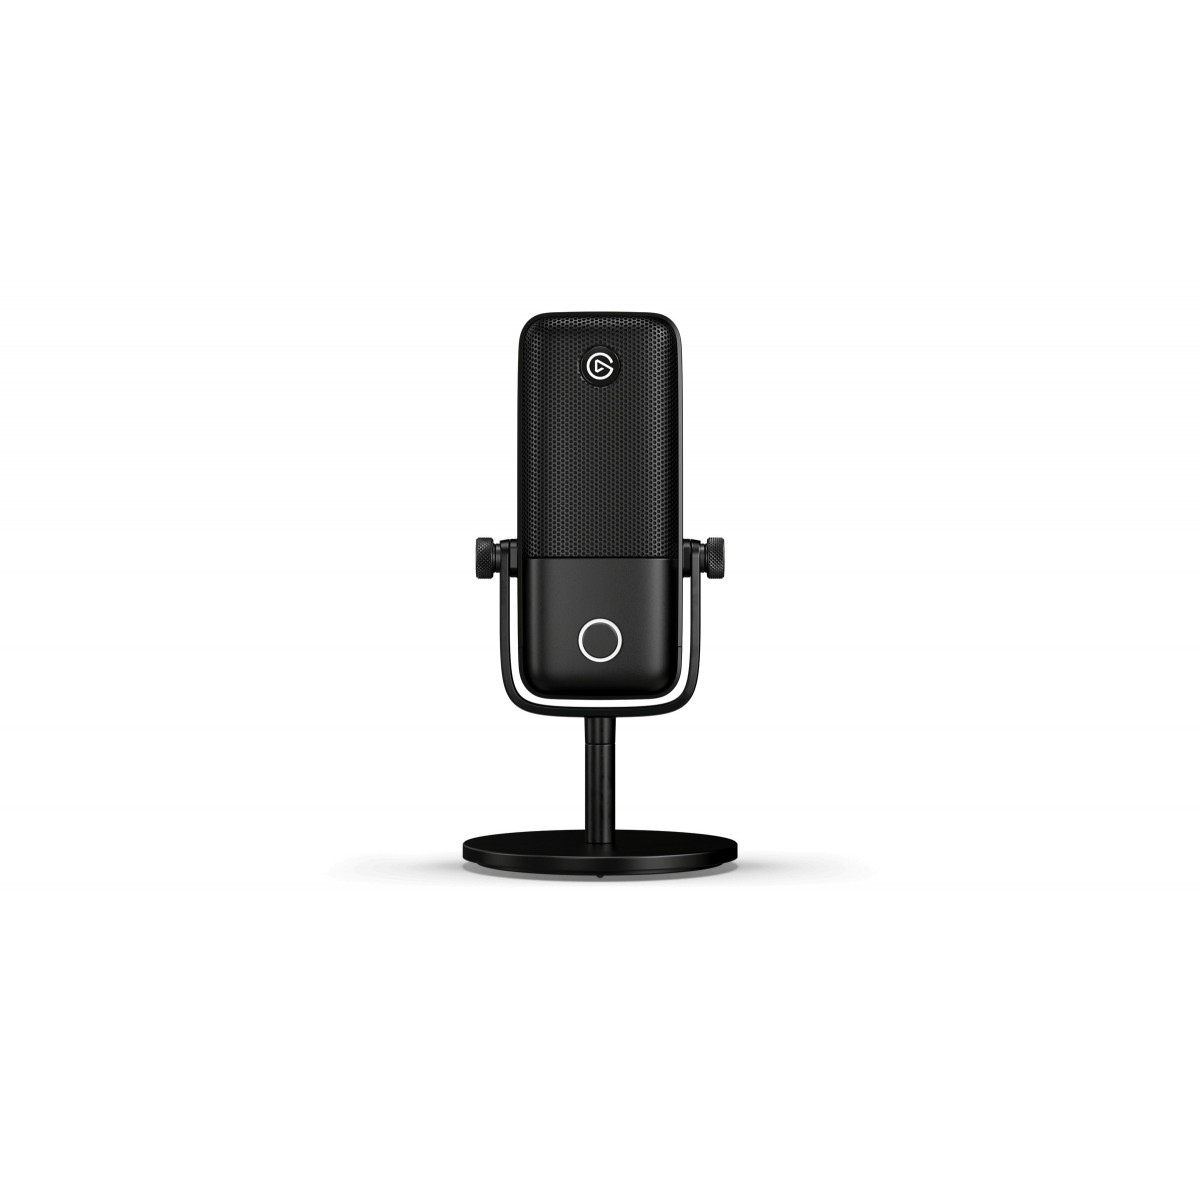 Elgato Wave 1 - Table microphone - 70 - 20000 Hz - 24 bit - 48 kHz - Wired - USB